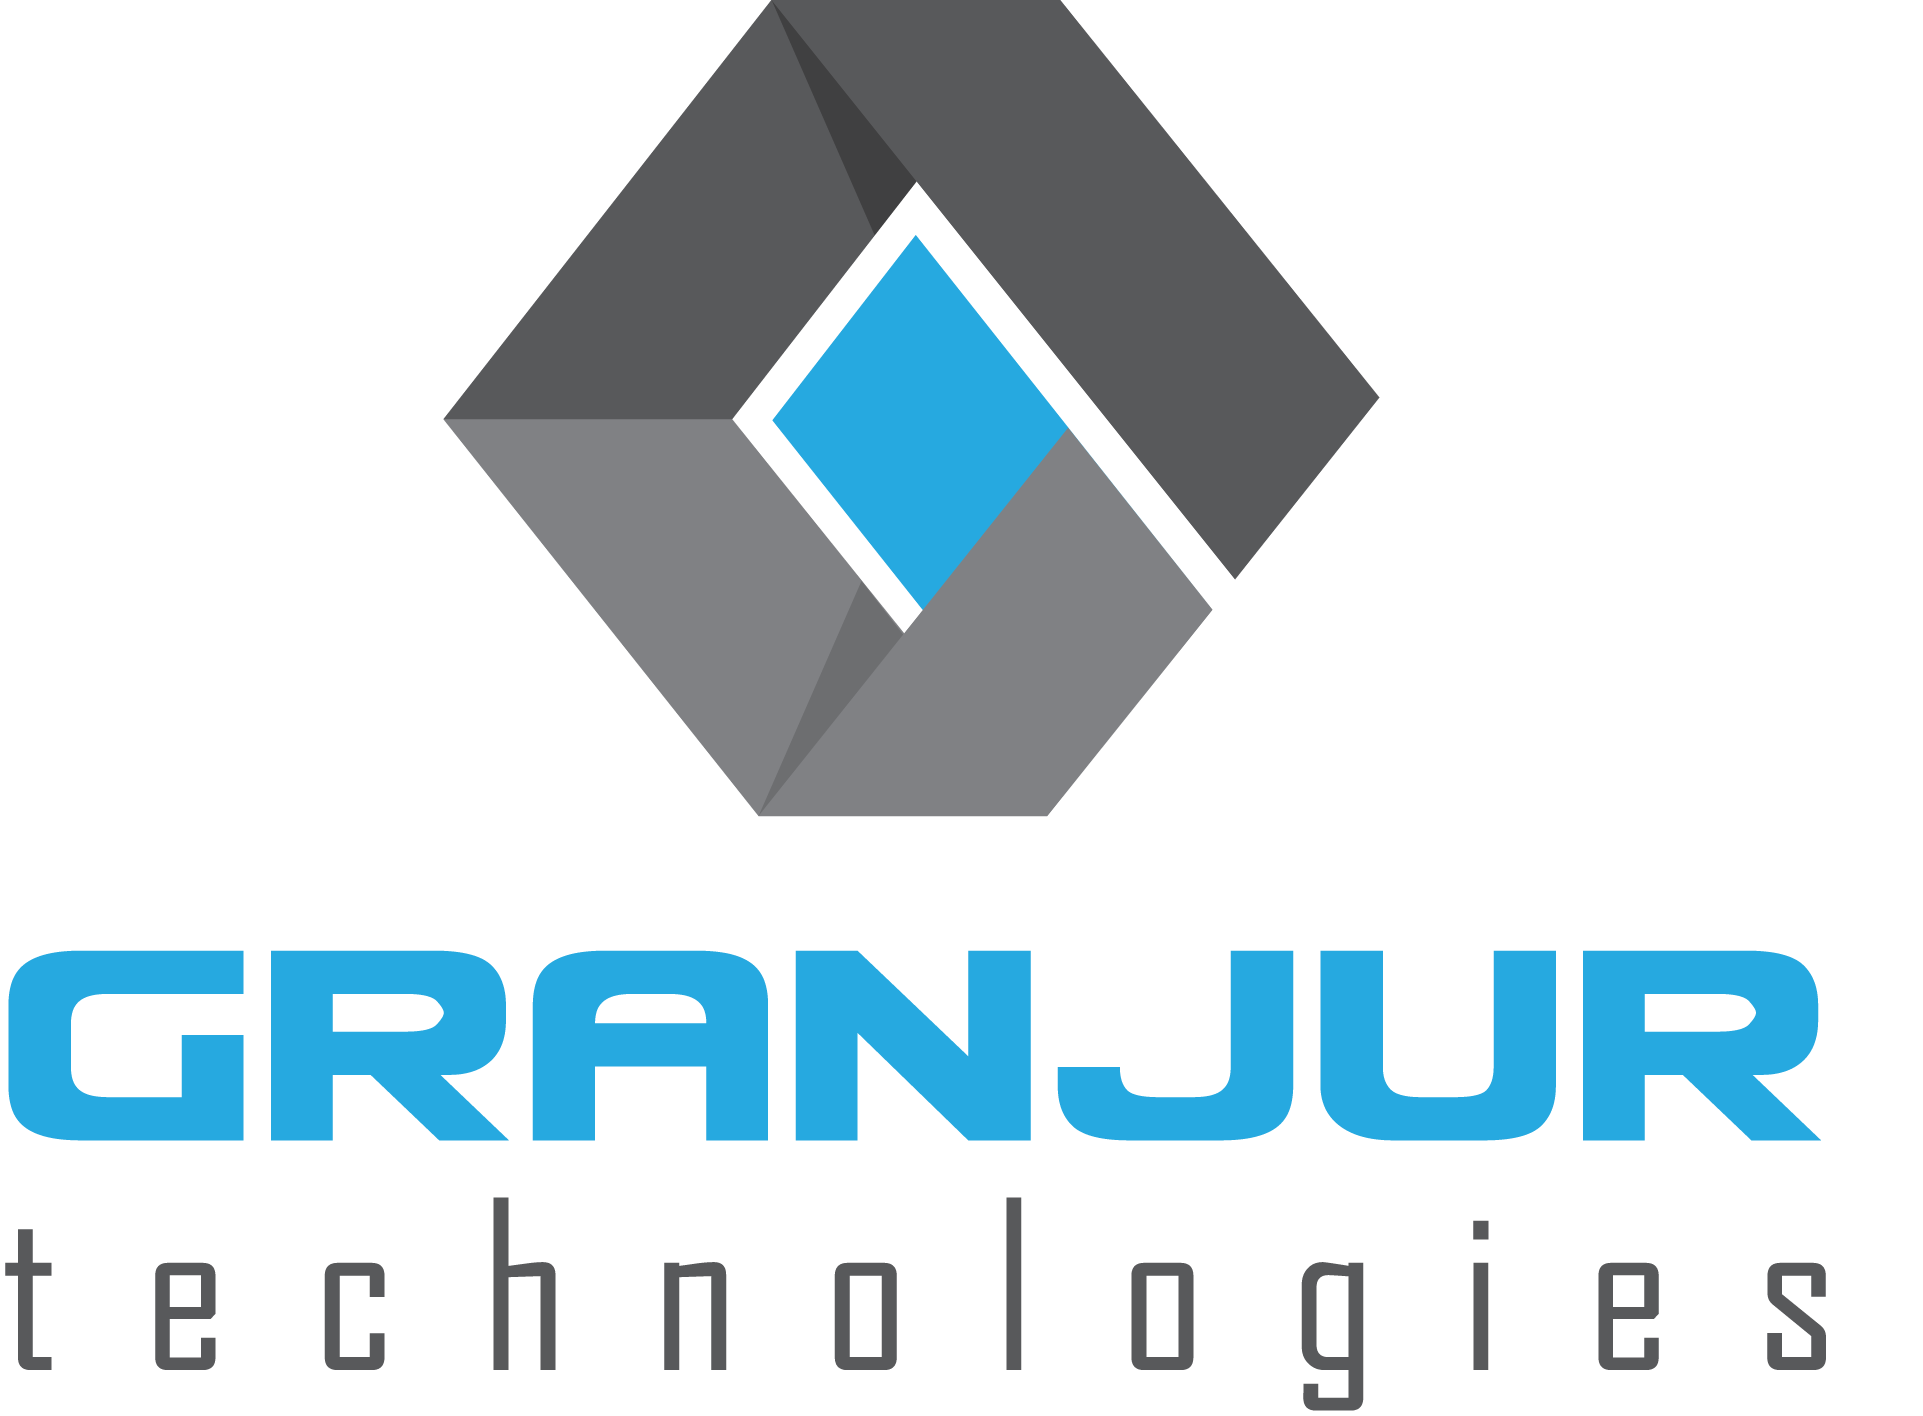 Granjur Technologies profile on Qualified.One